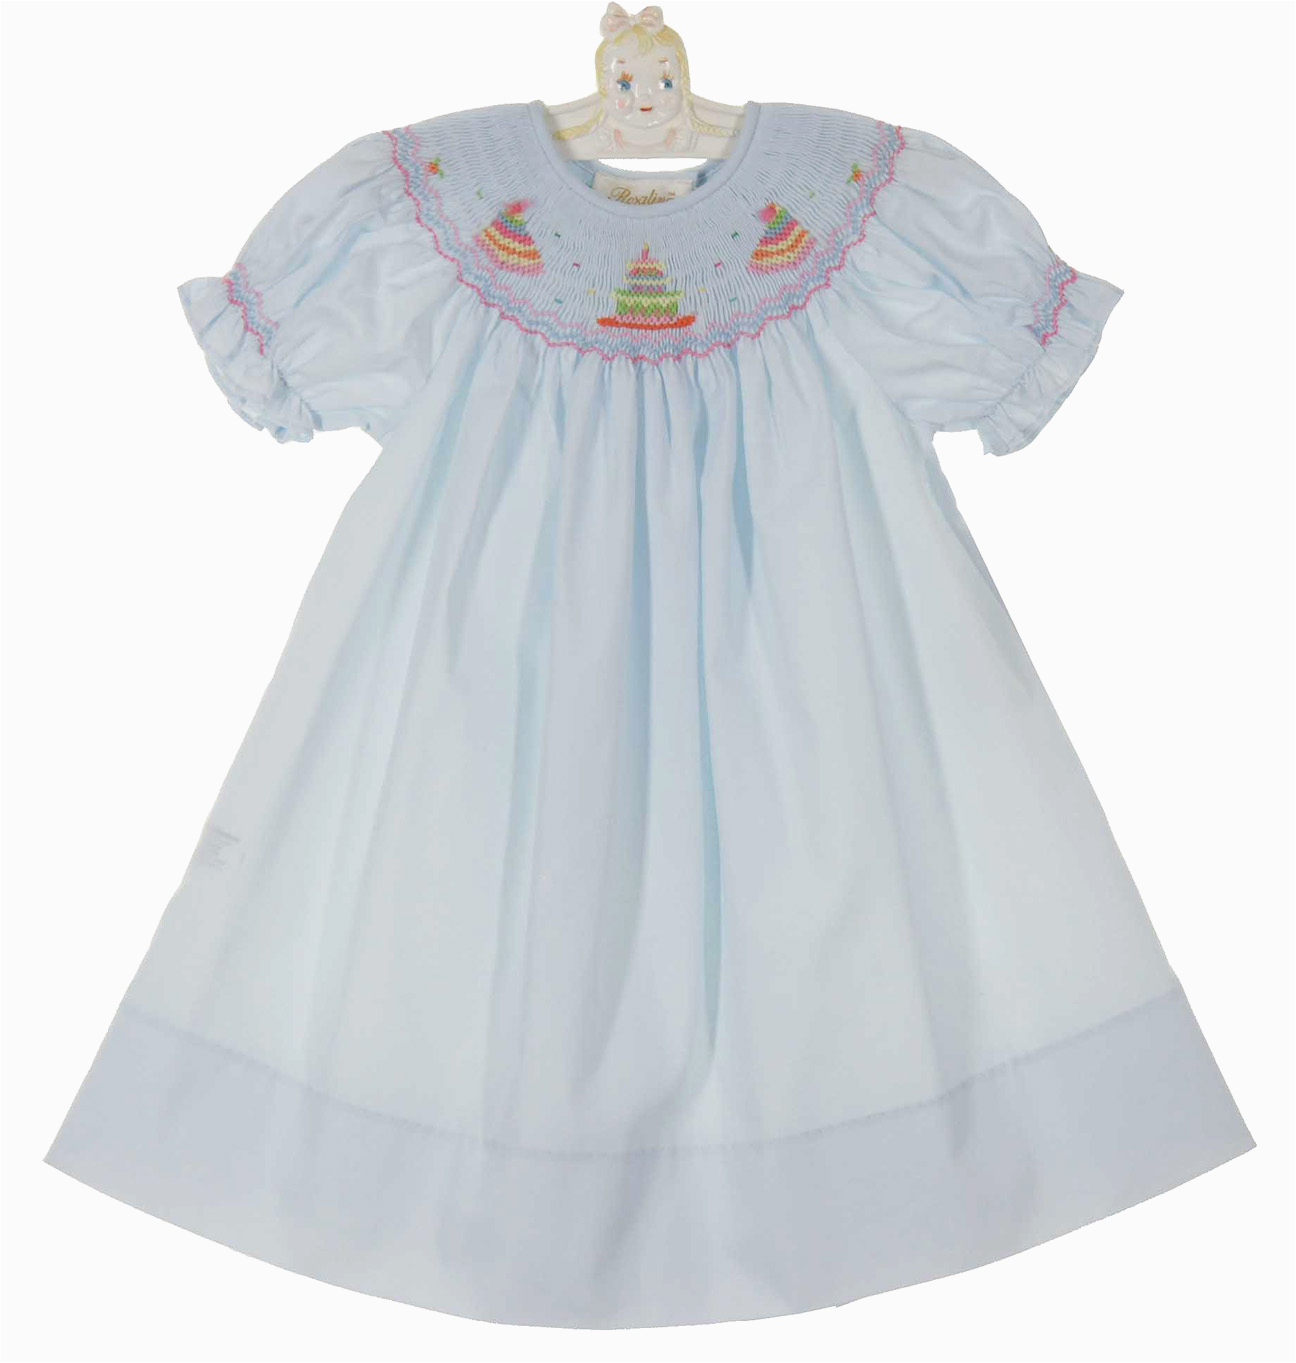 new rosalina pale blue bishop smocked dress with birthday cake embroidery